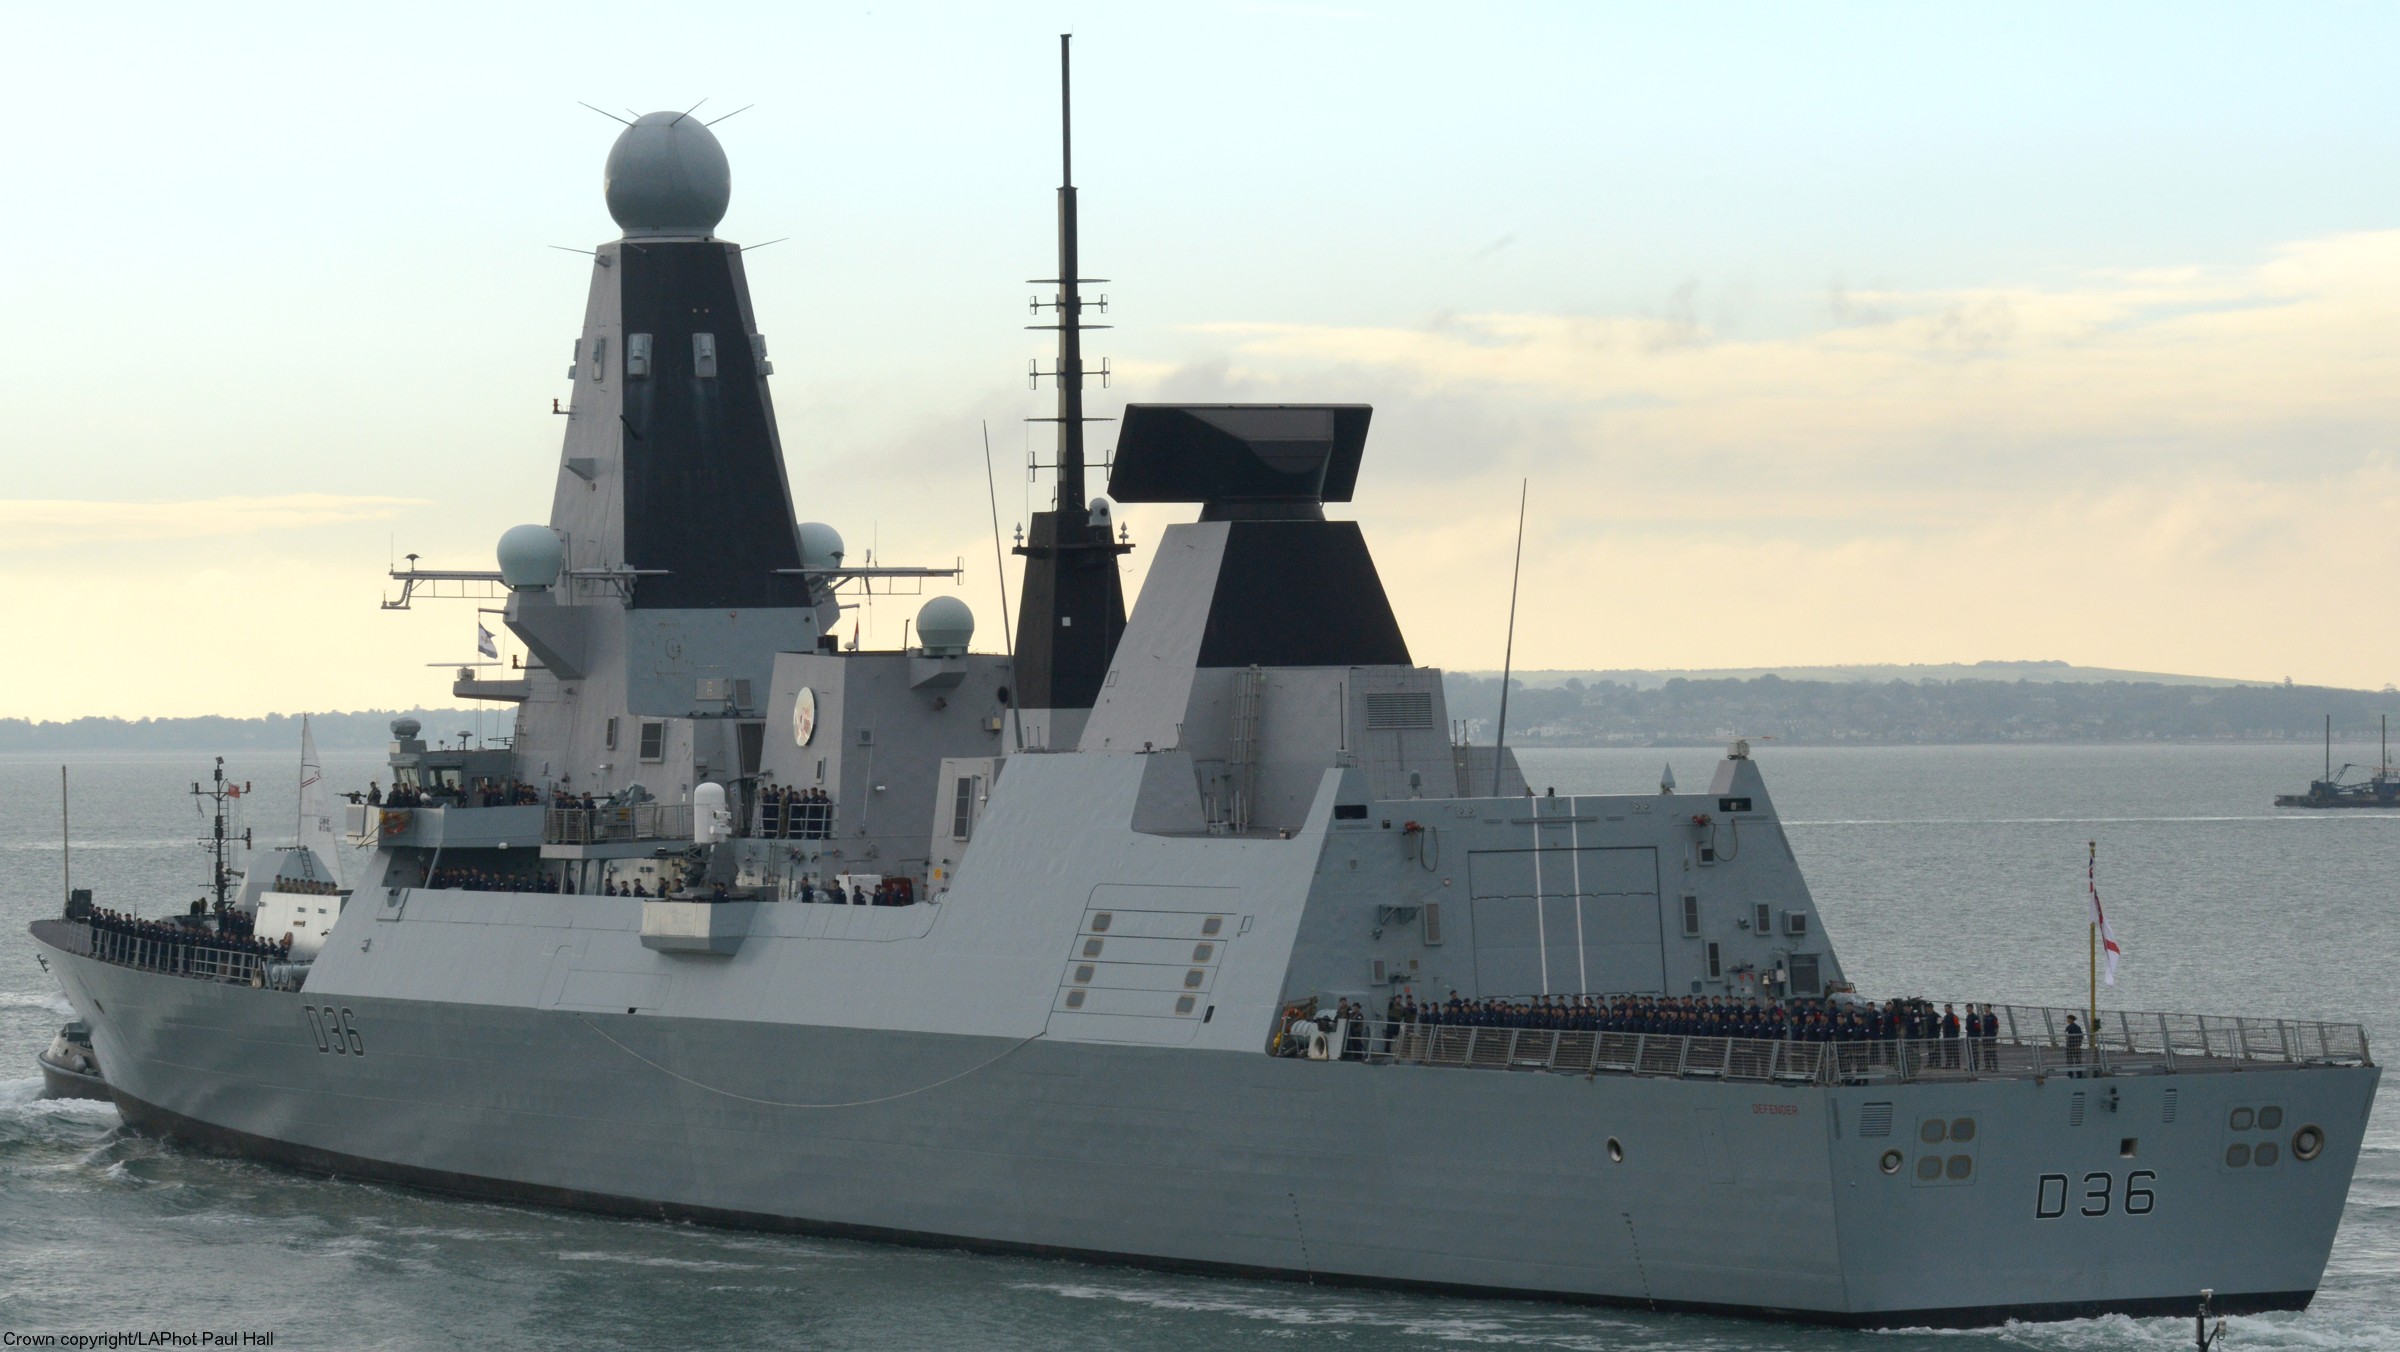 d36 hms defender d-36 type 45 daring class guided missile destroyer ddg royal navy sea viper 29